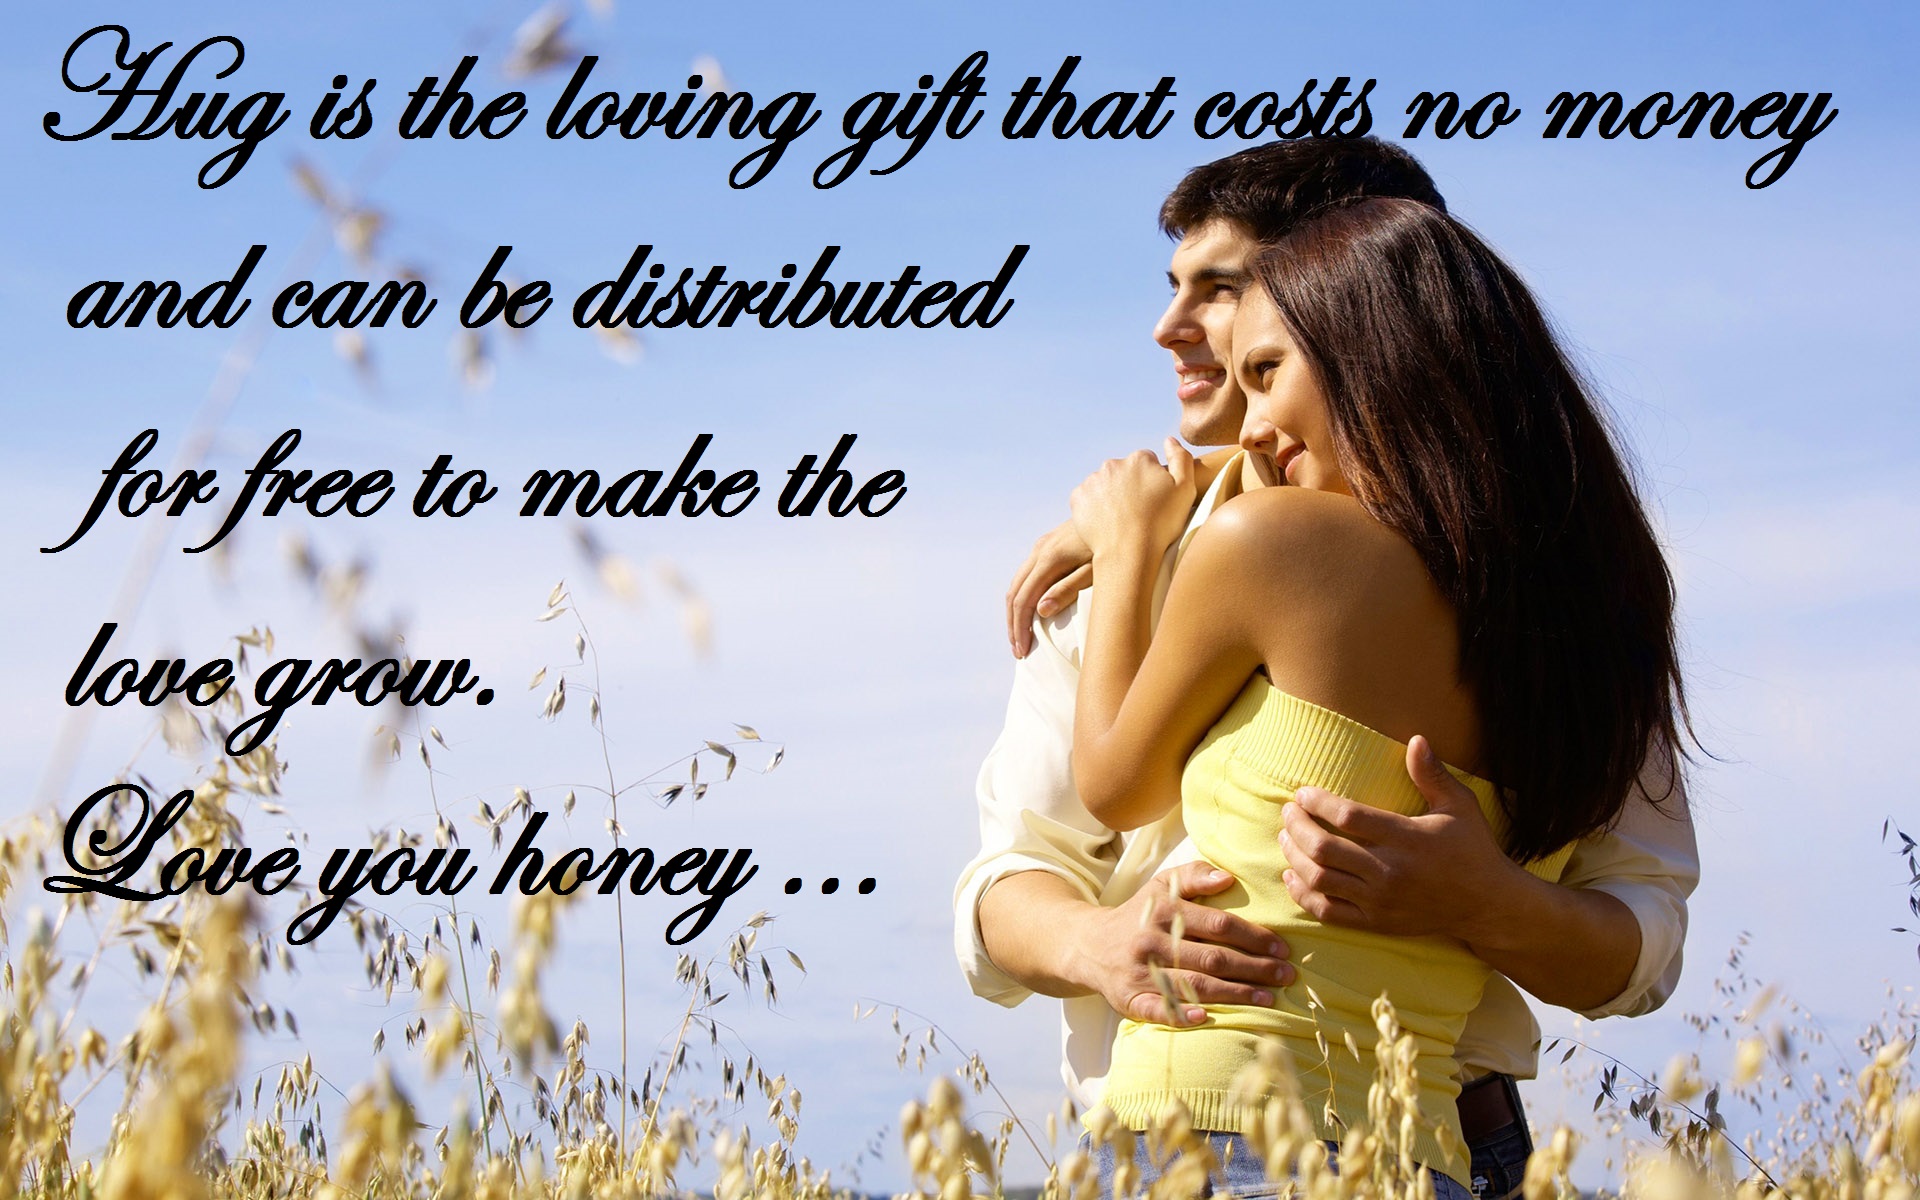 Happy Hug day 2016 SMS, Wishes, Quotes, Wallpaper, Images, Shayari